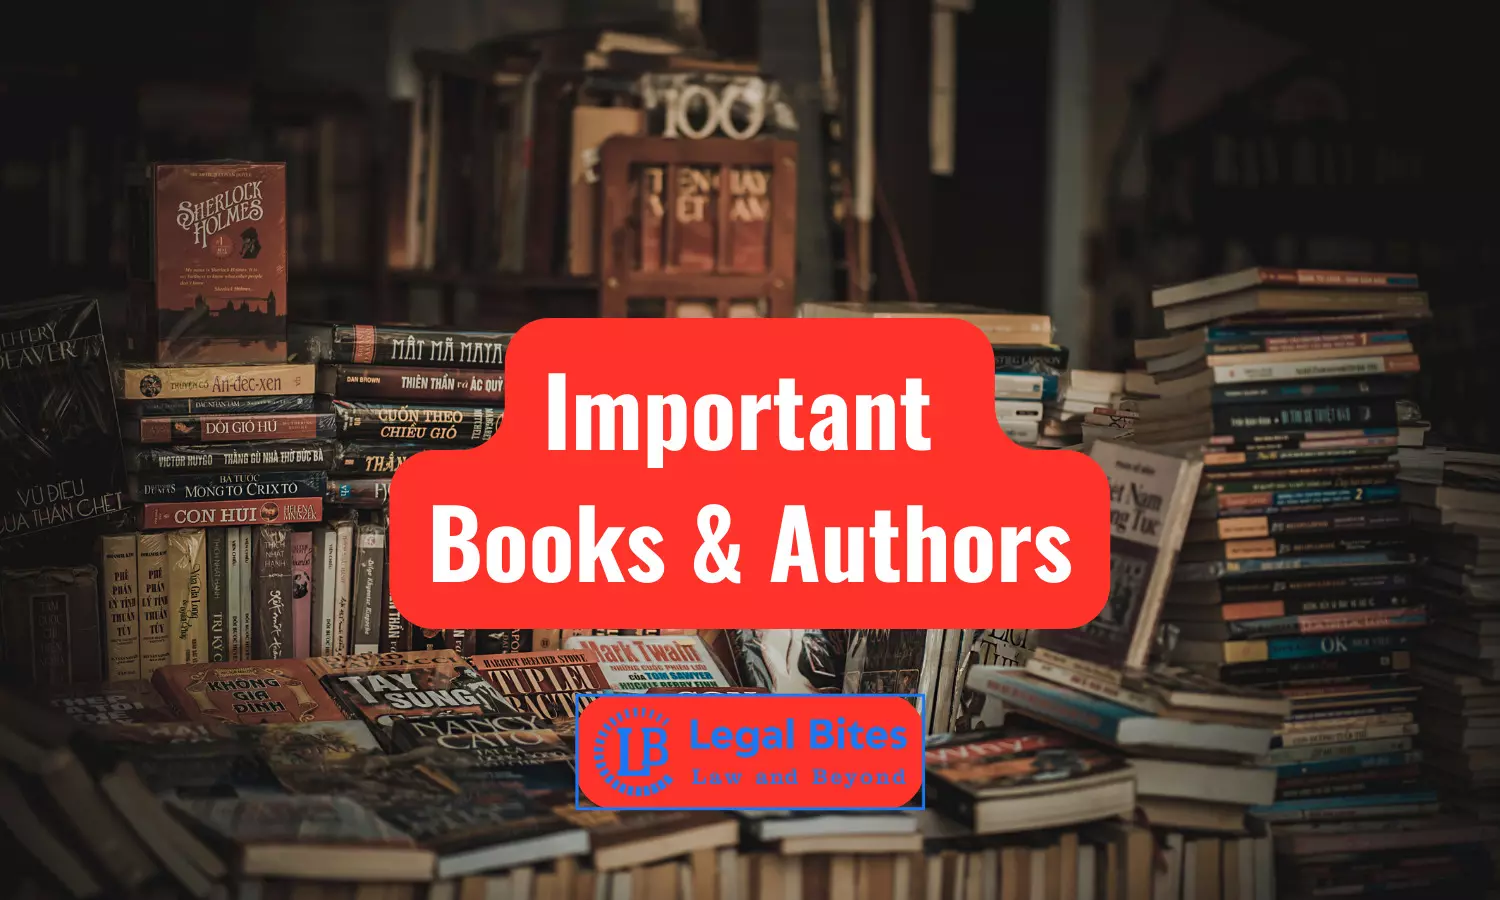 List of Important Books and Authors